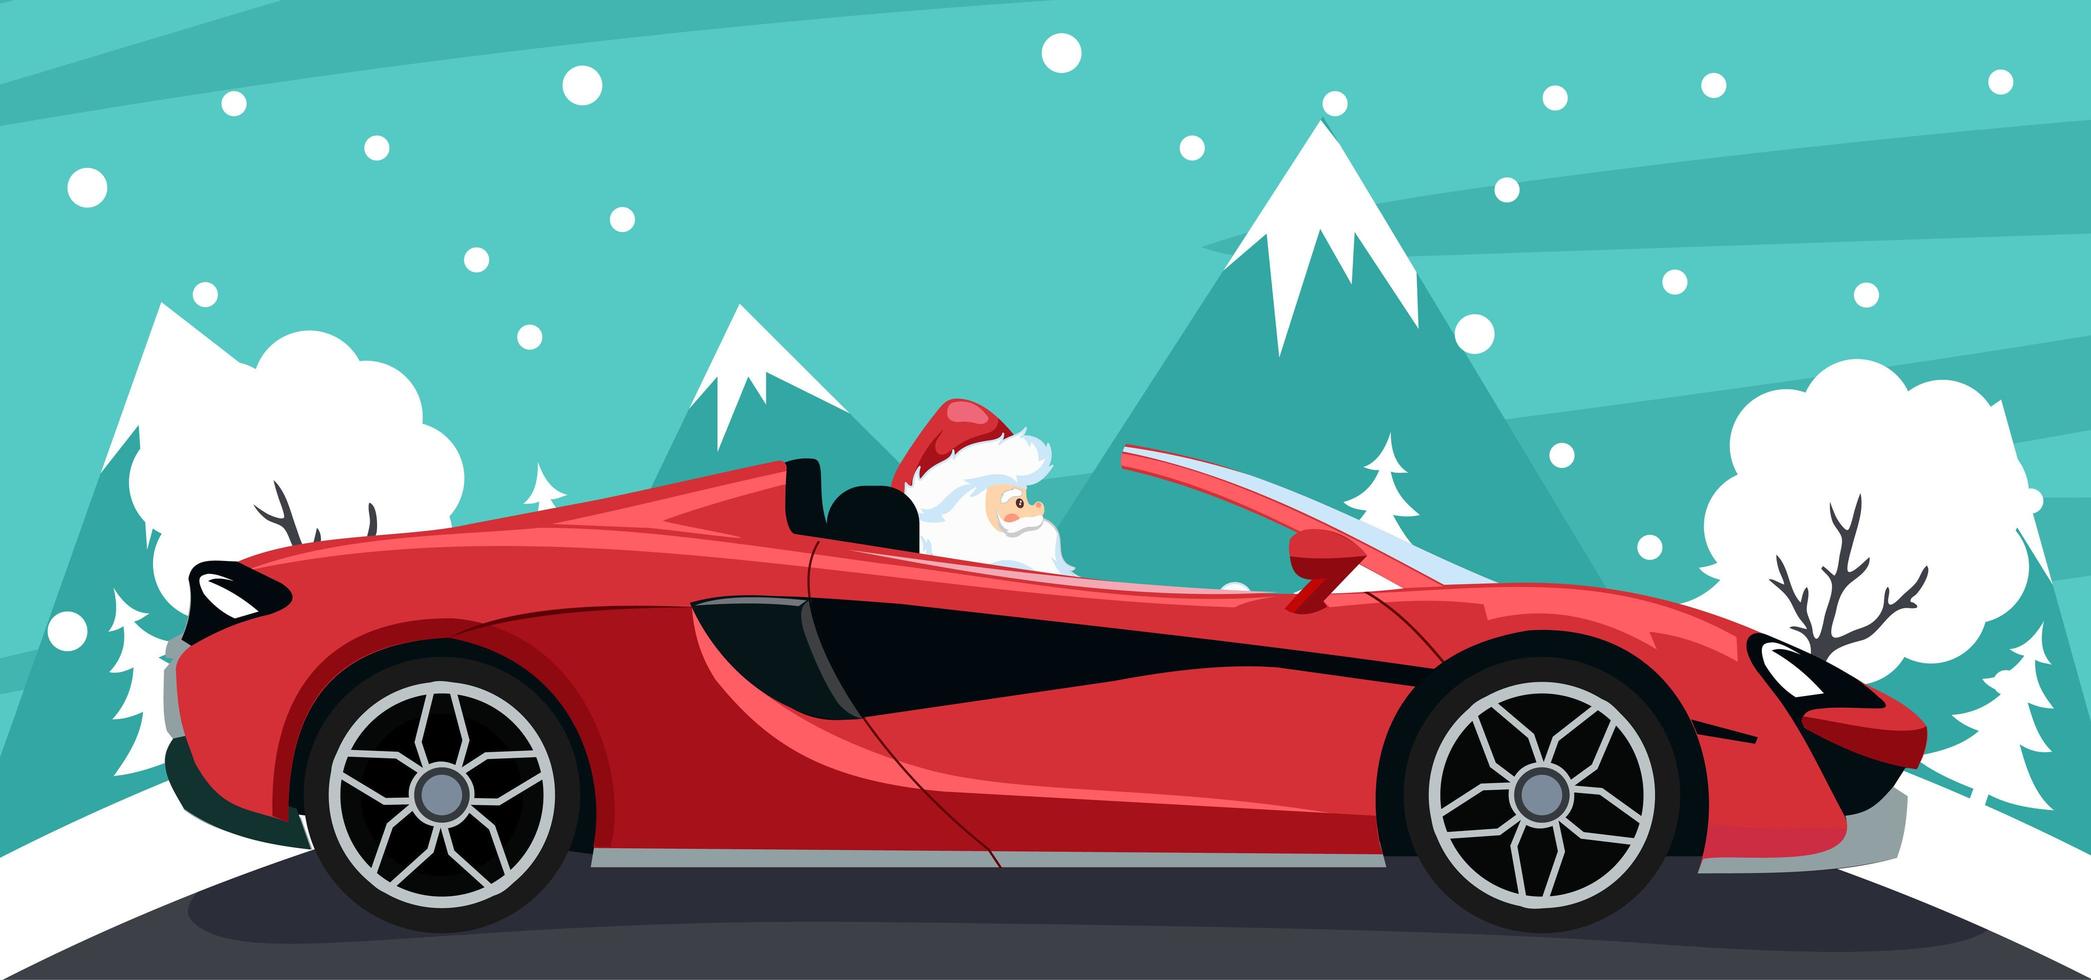 Background design of santa claus in luxurious car vector